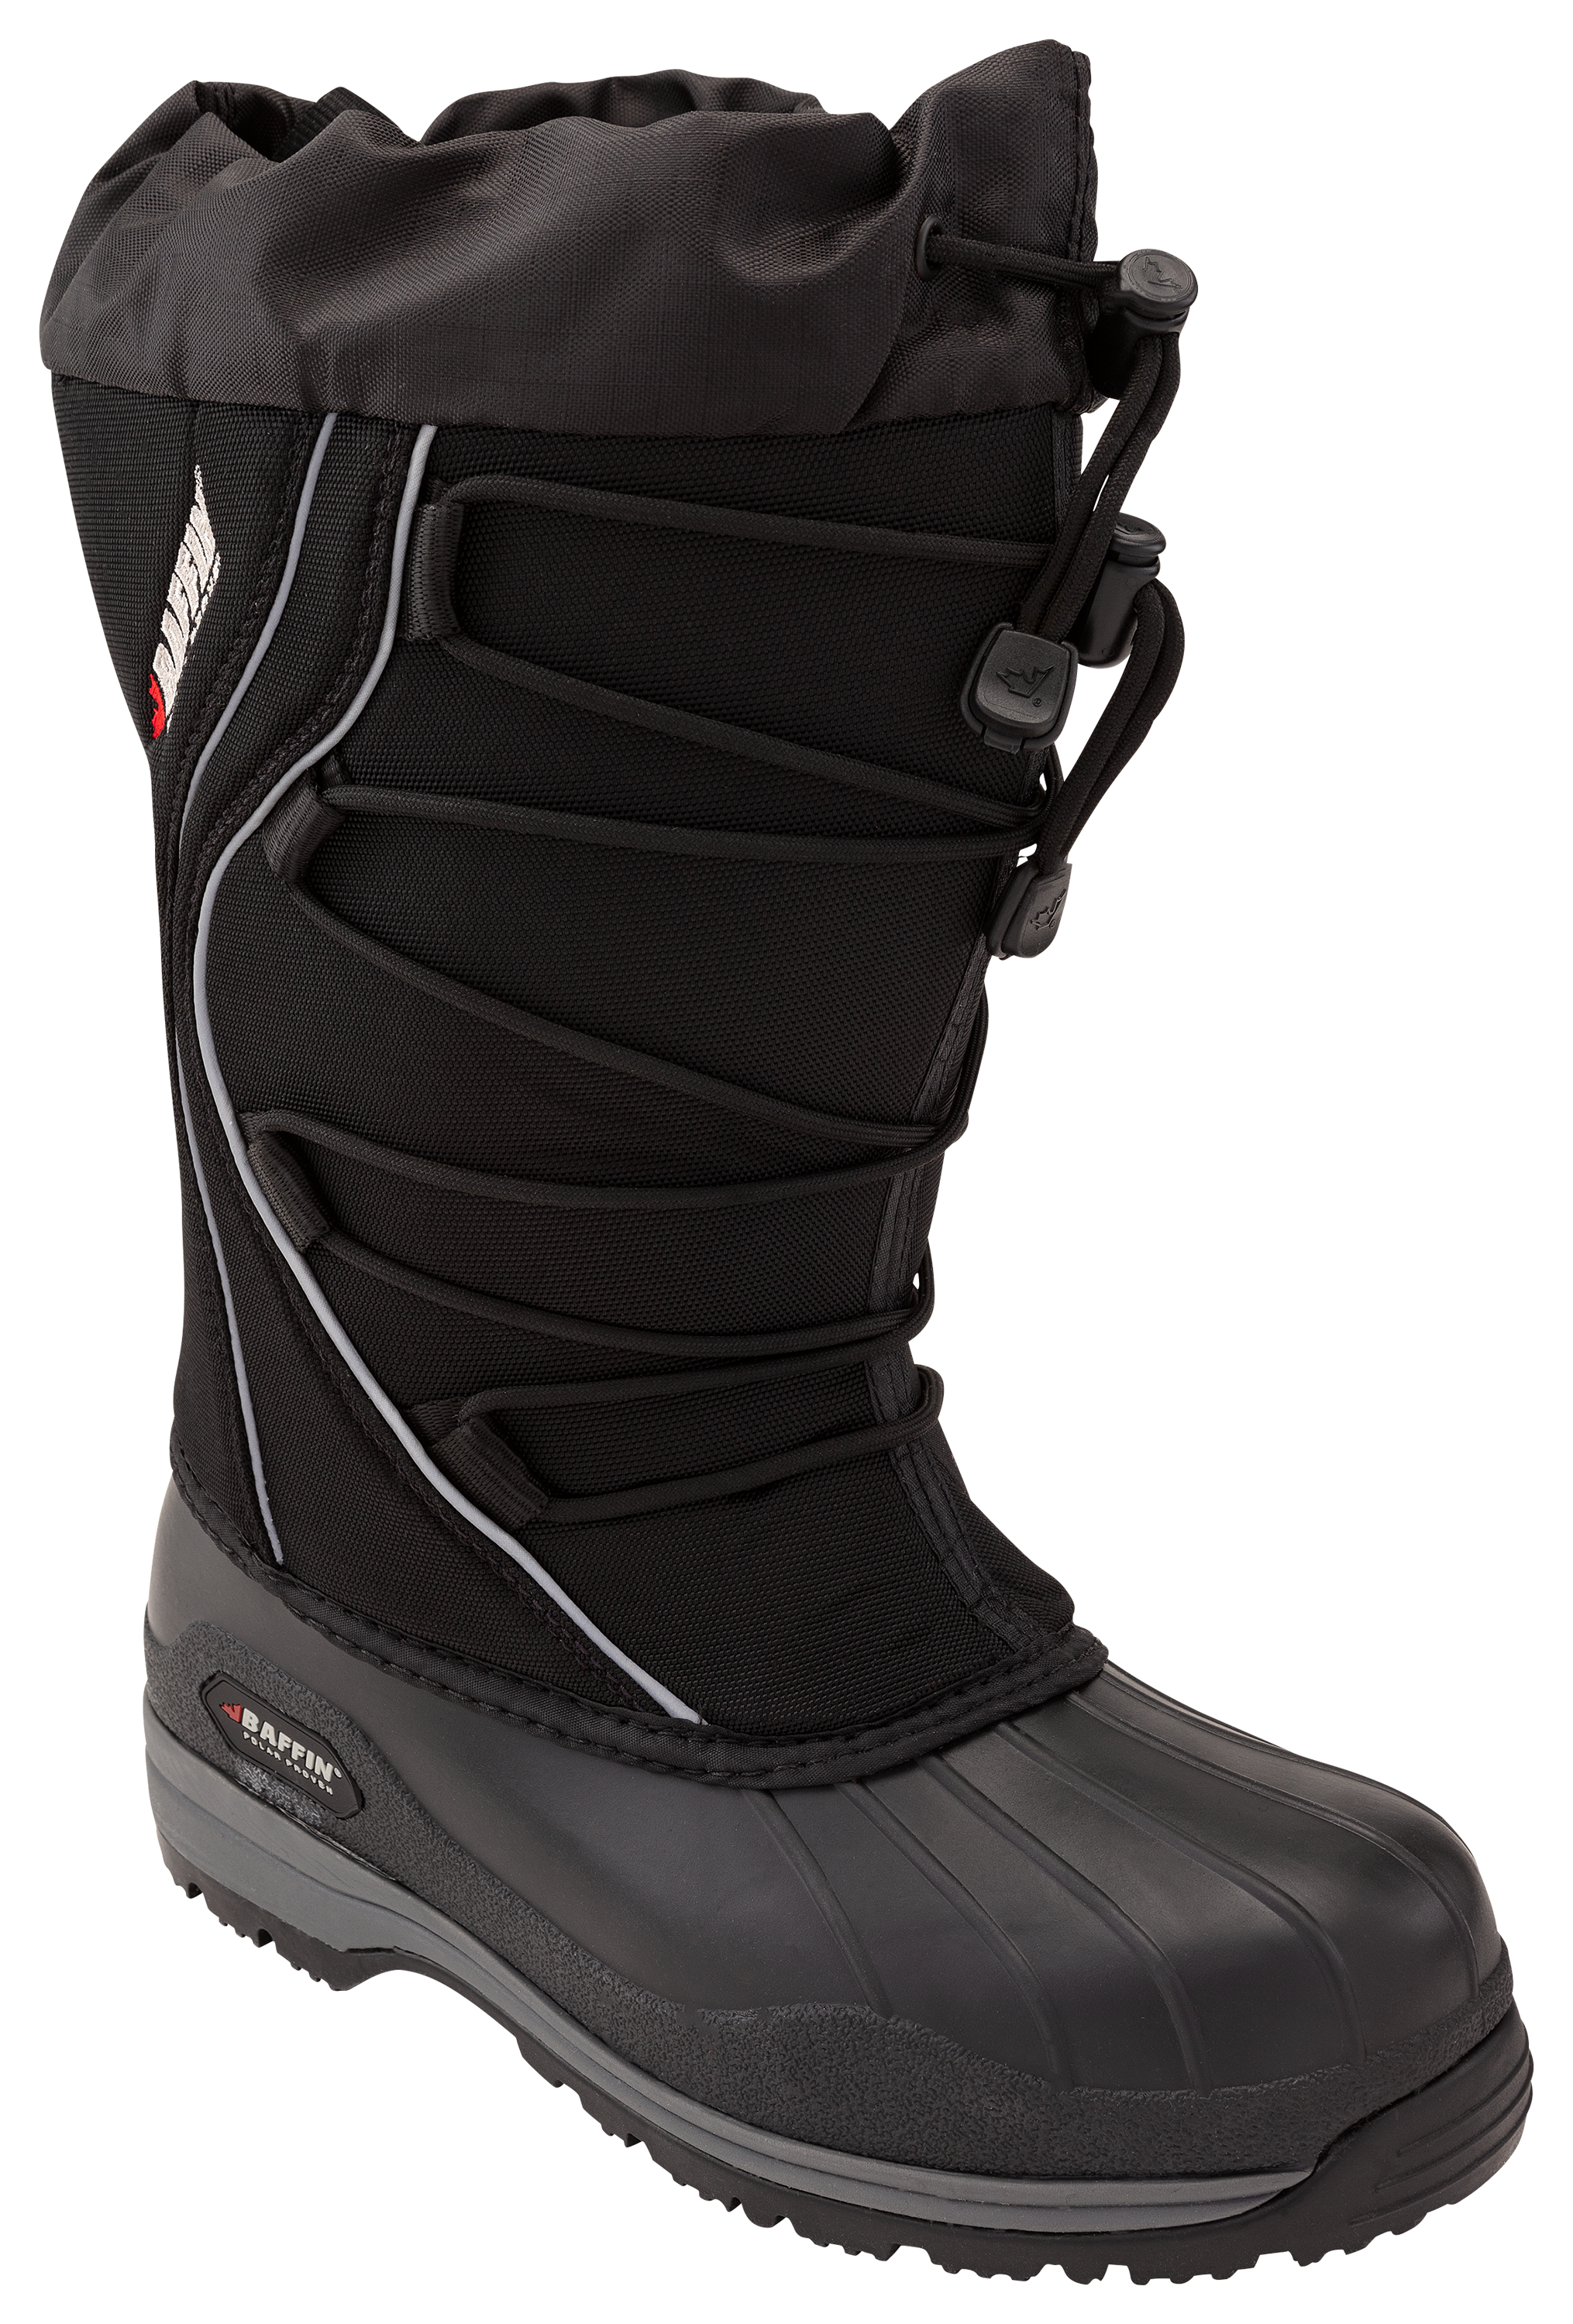 Baffin Icefield Pac Boots for Ladies - Black - 10M